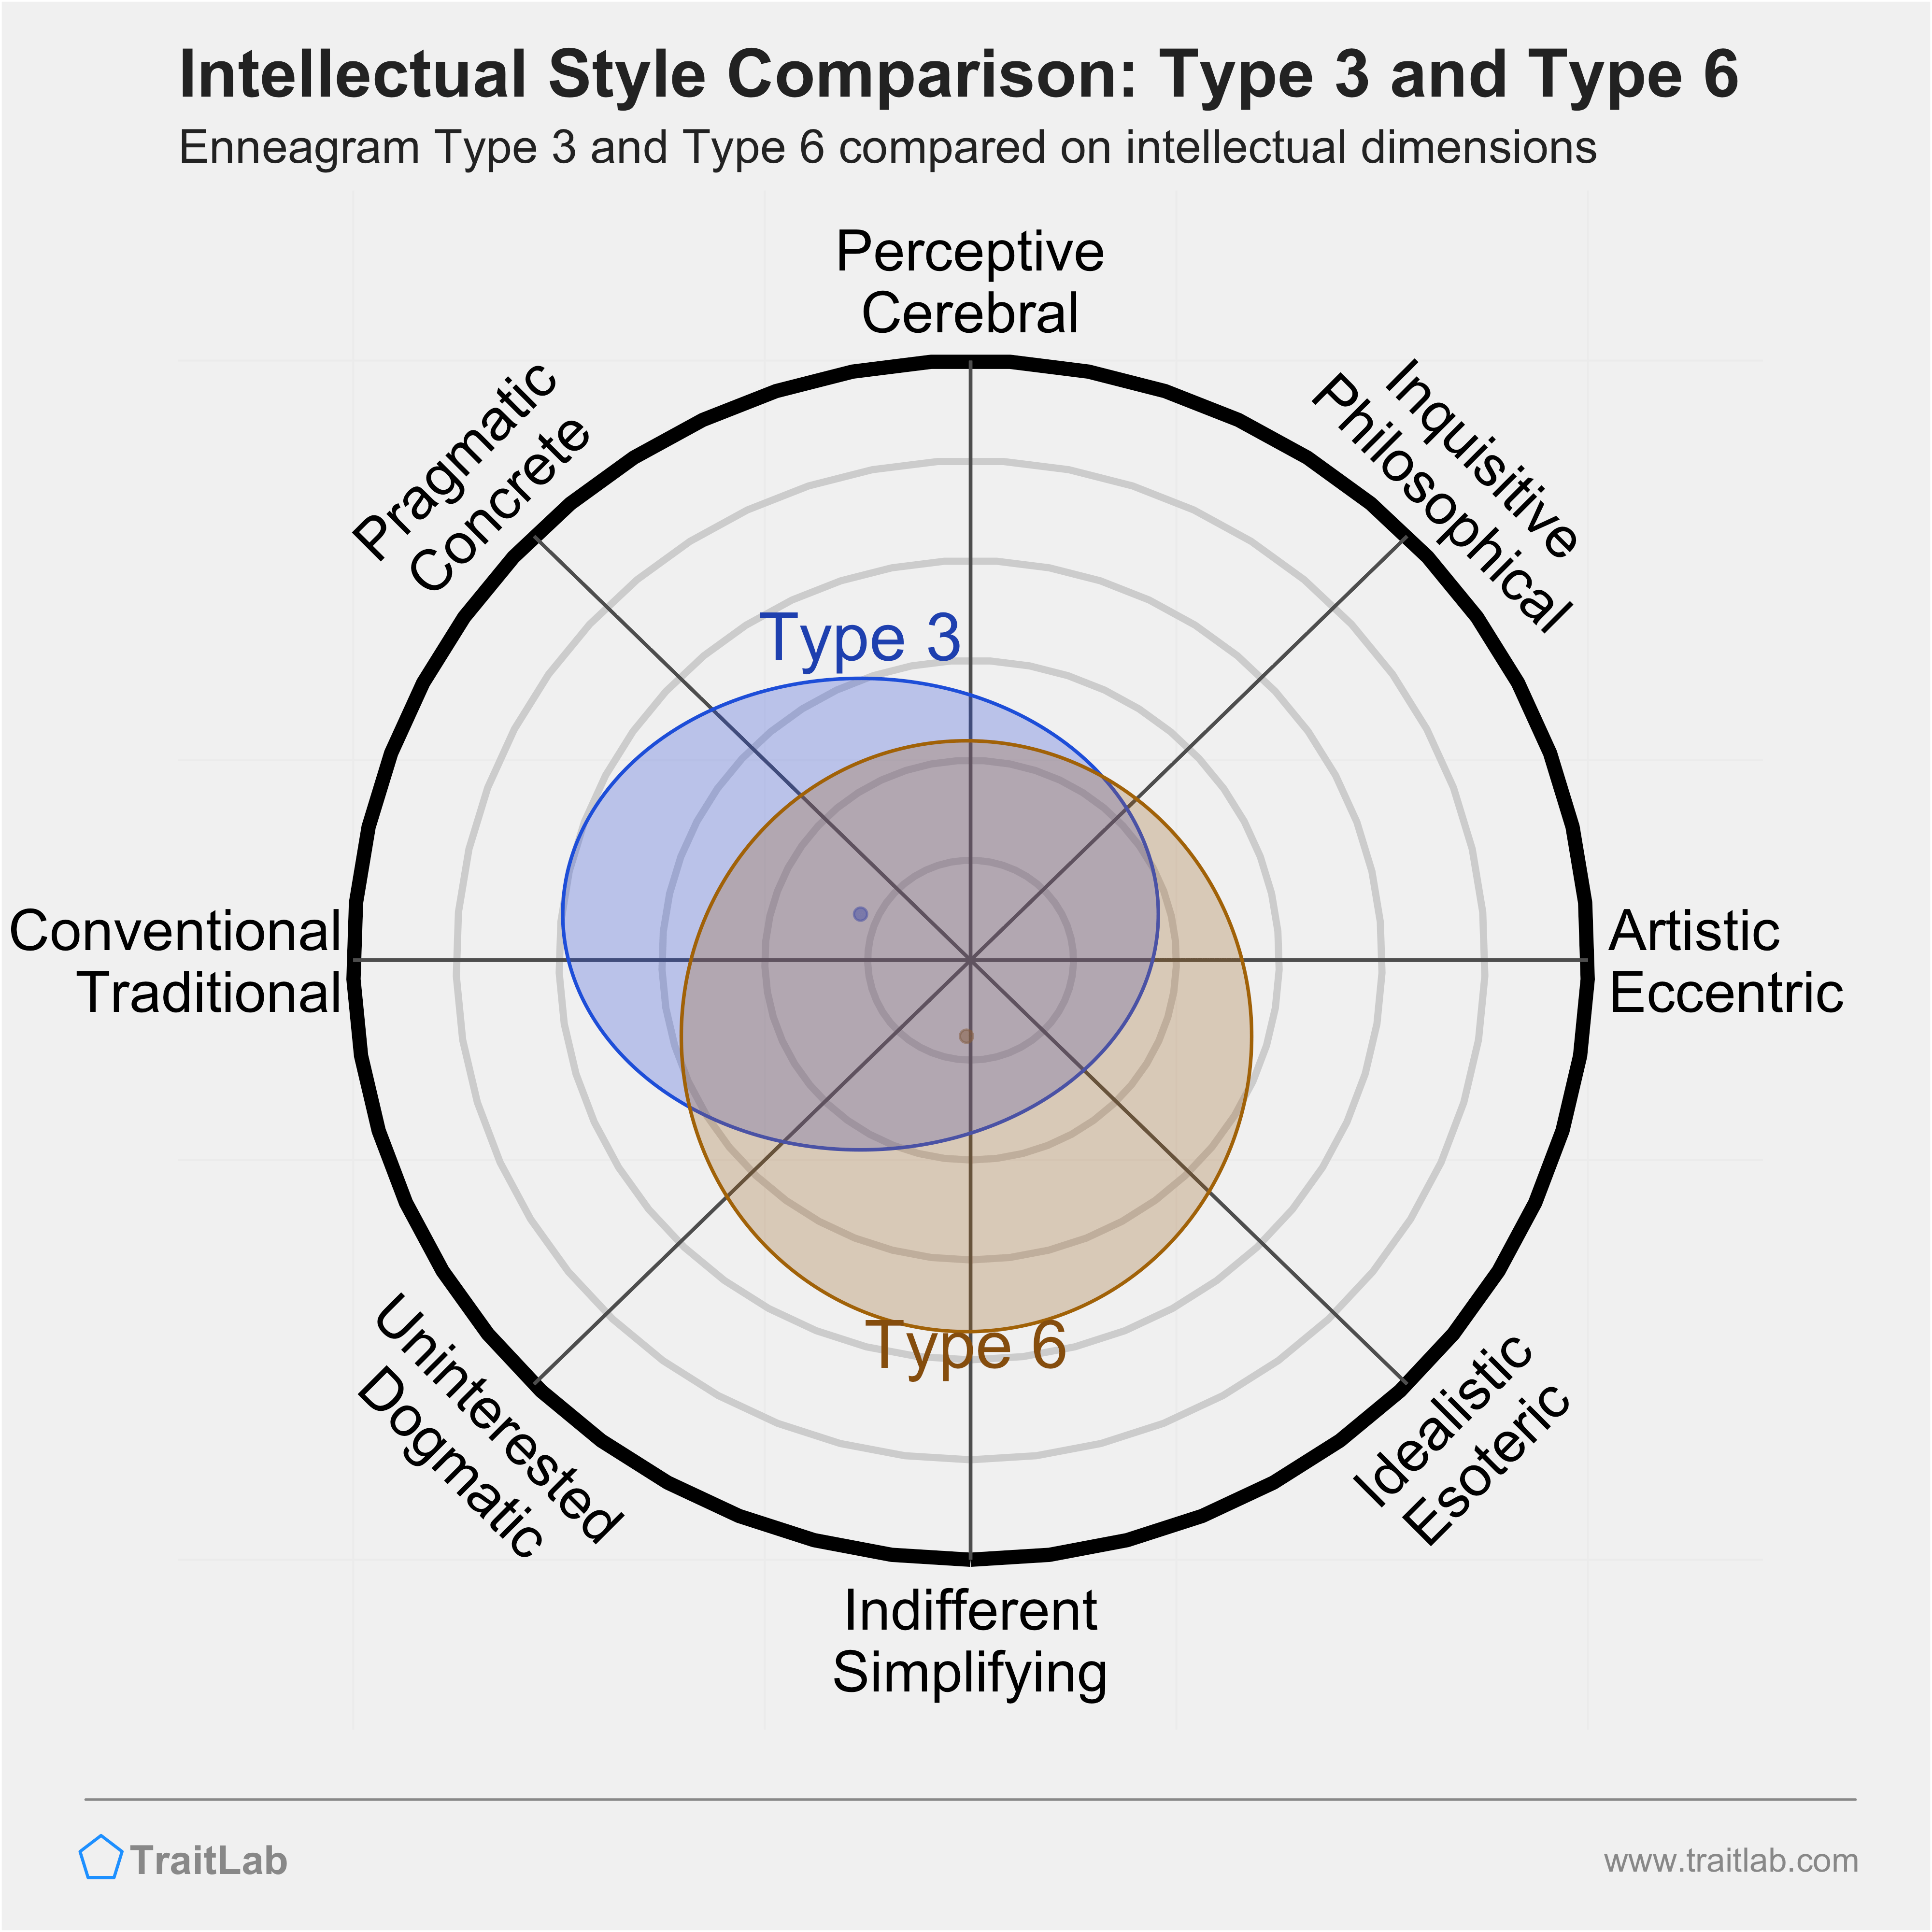 Type 3 and Type 6 comparison across intellectual dimensions